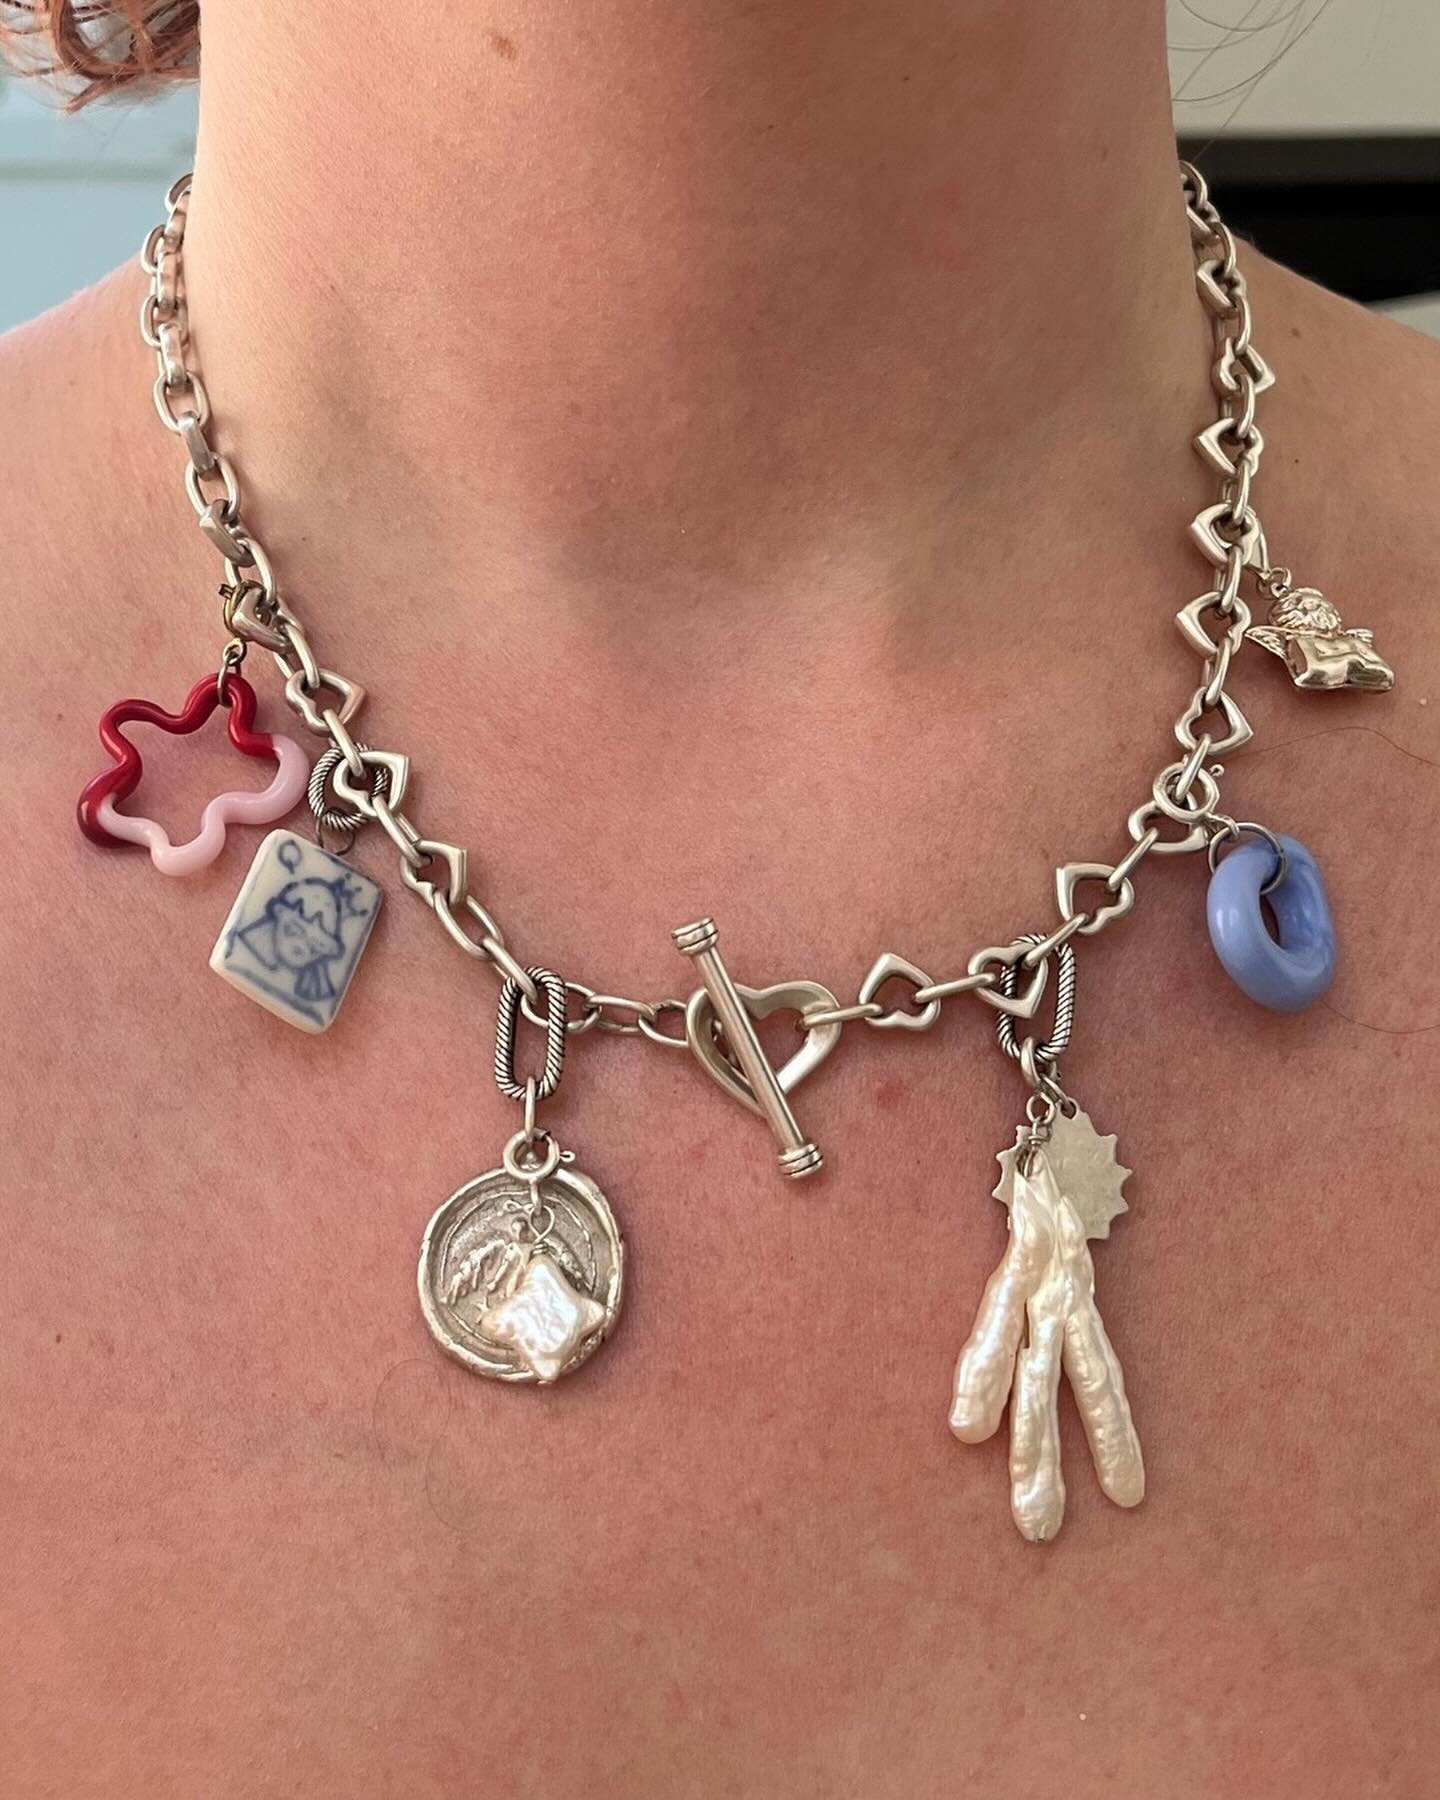 Charm necklace heaven 👼 Whilst I was on holiday I took away some gorgeous treasures including these charm necklaces I put together 💎 Featuring vintage pieces I&rsquo;ve sourced and some fabulous pieces made by some small business angels (tagged) 🪽